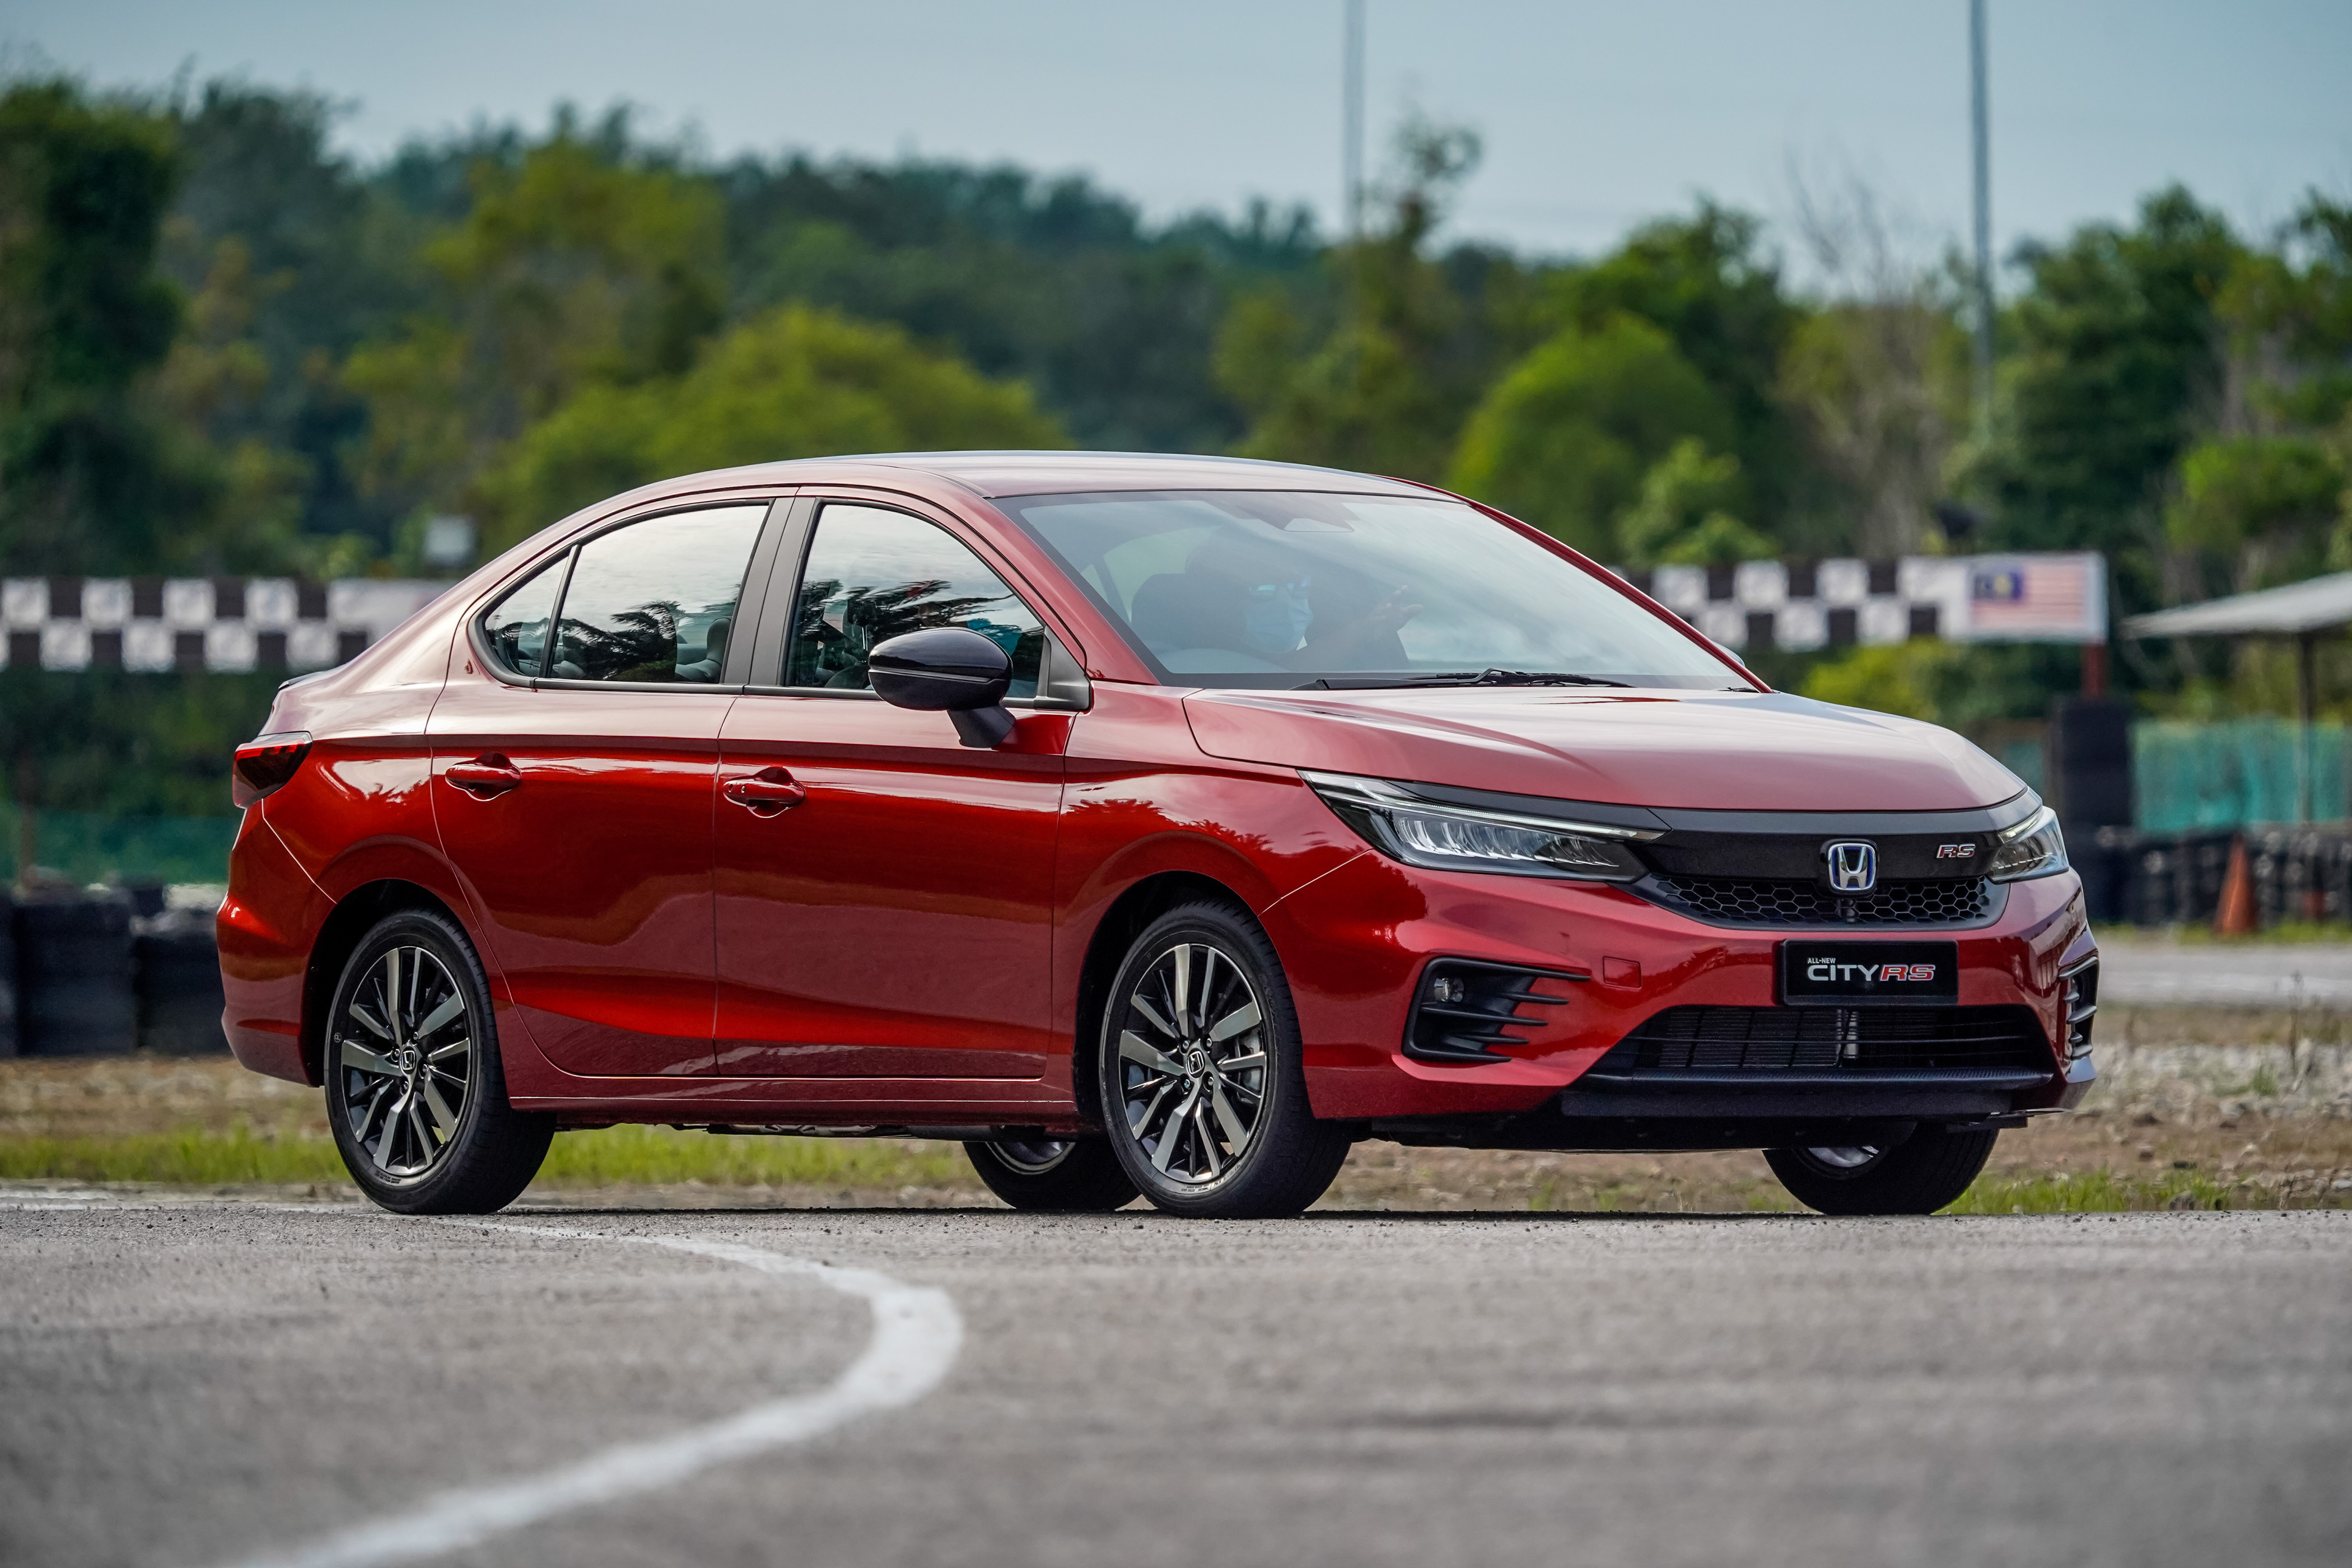 2020 Honda City RS i-MMD - more details and photos, variant features ...